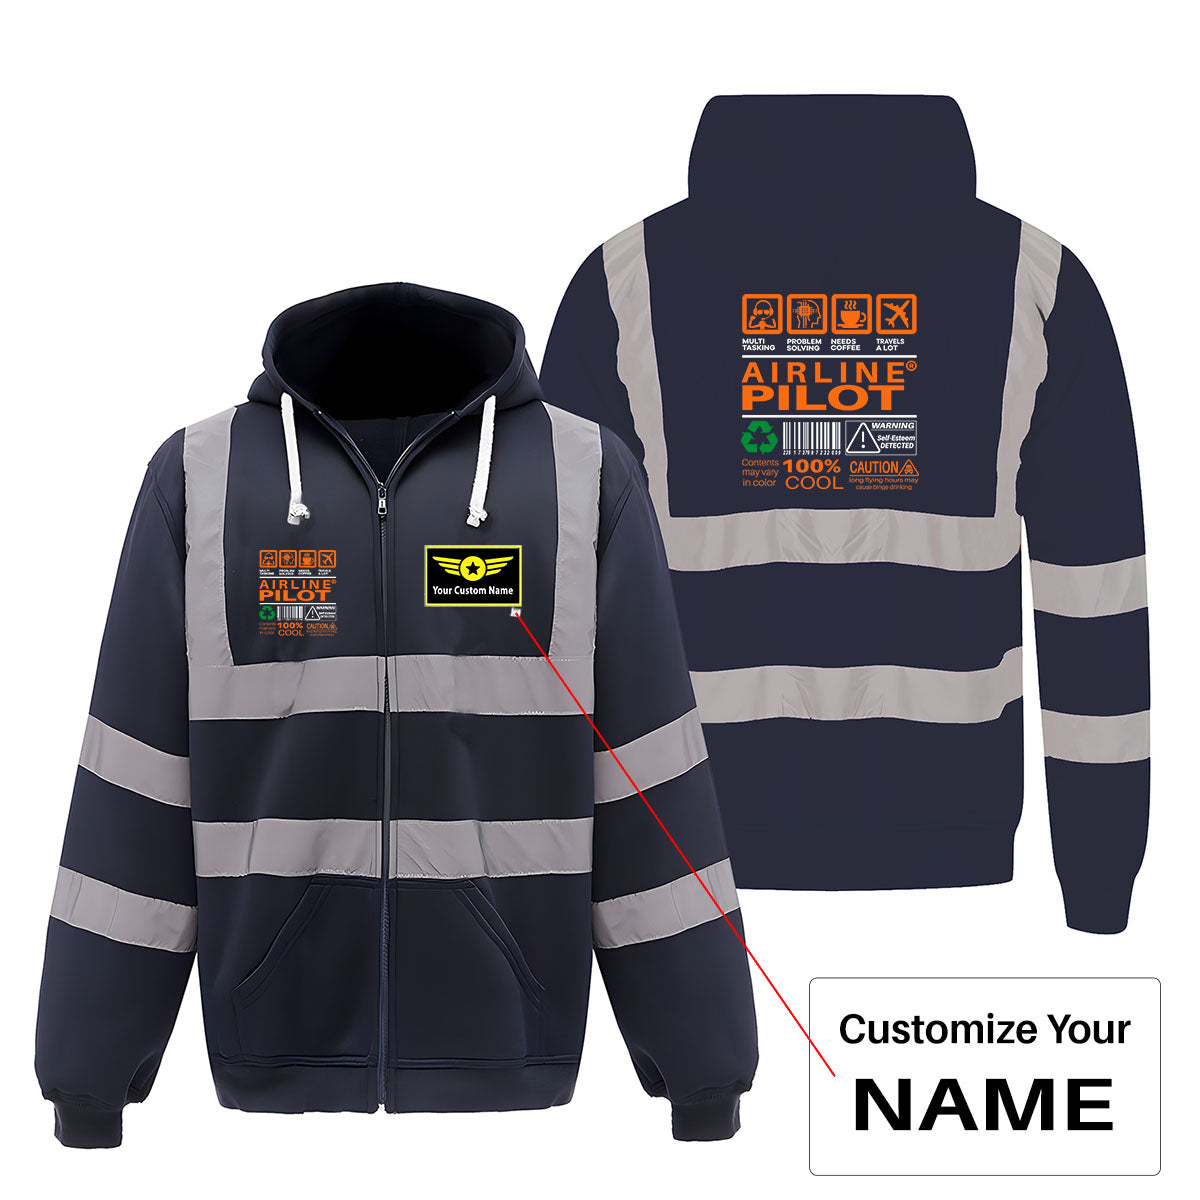 Airline Pilot Label Designed Reflective Zipped Hoodies